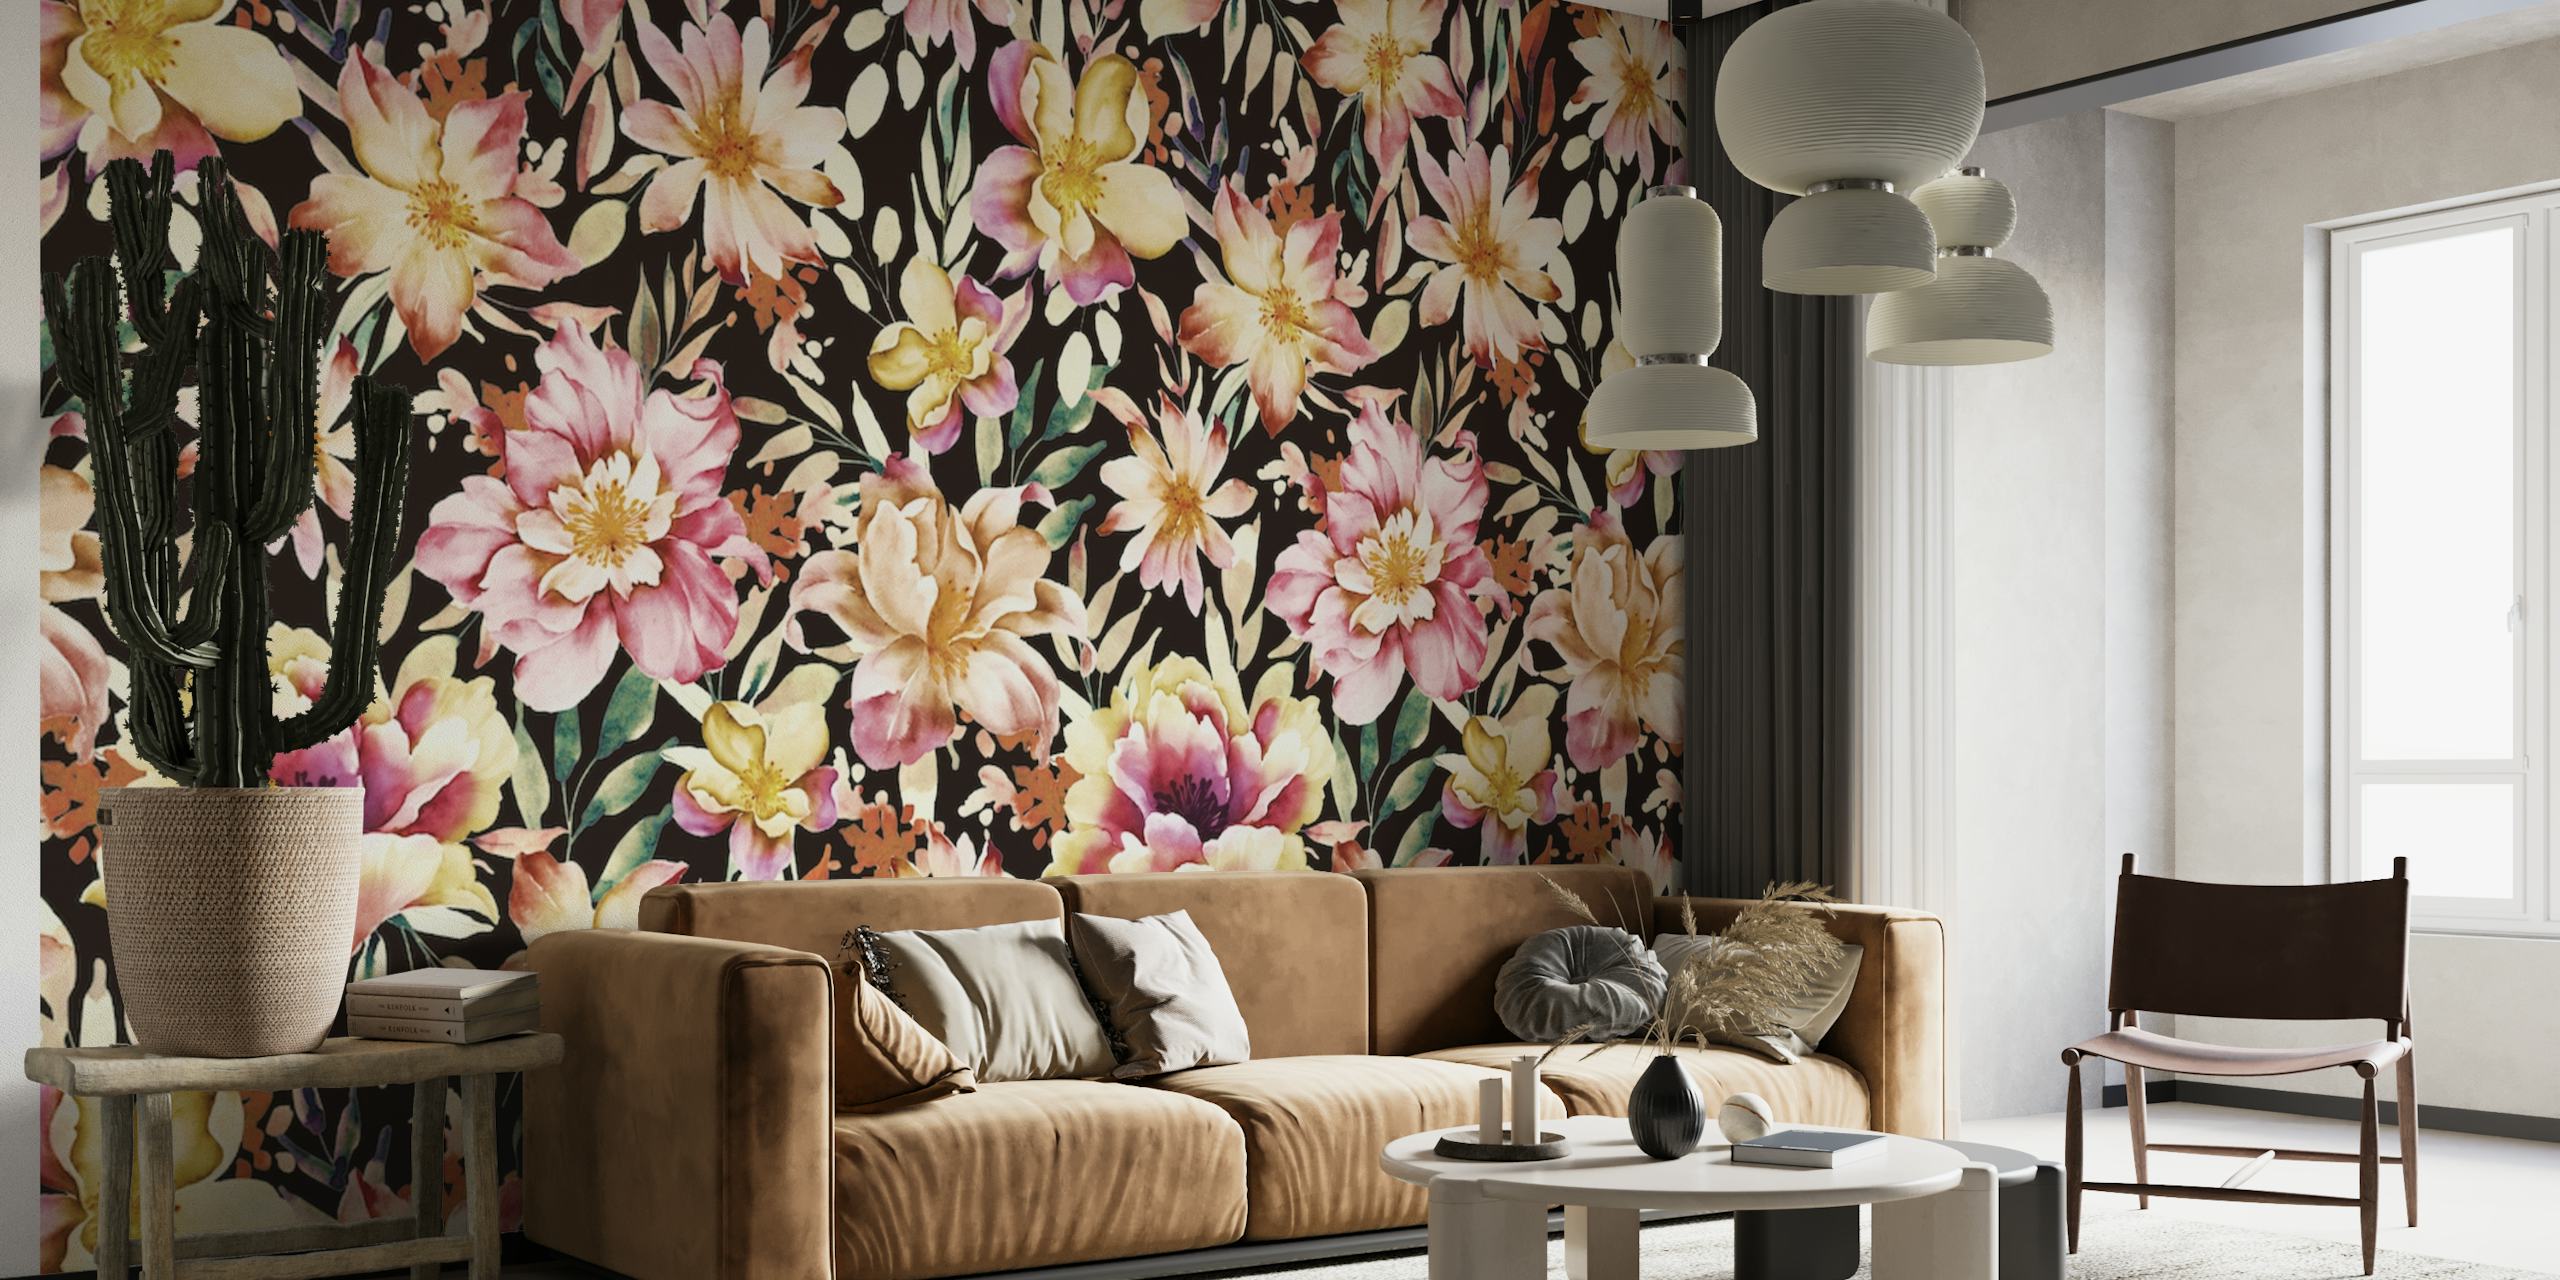 Floral-pattern wall mural with a mix of vibrant and dark flowers evoking a mystical garden at night